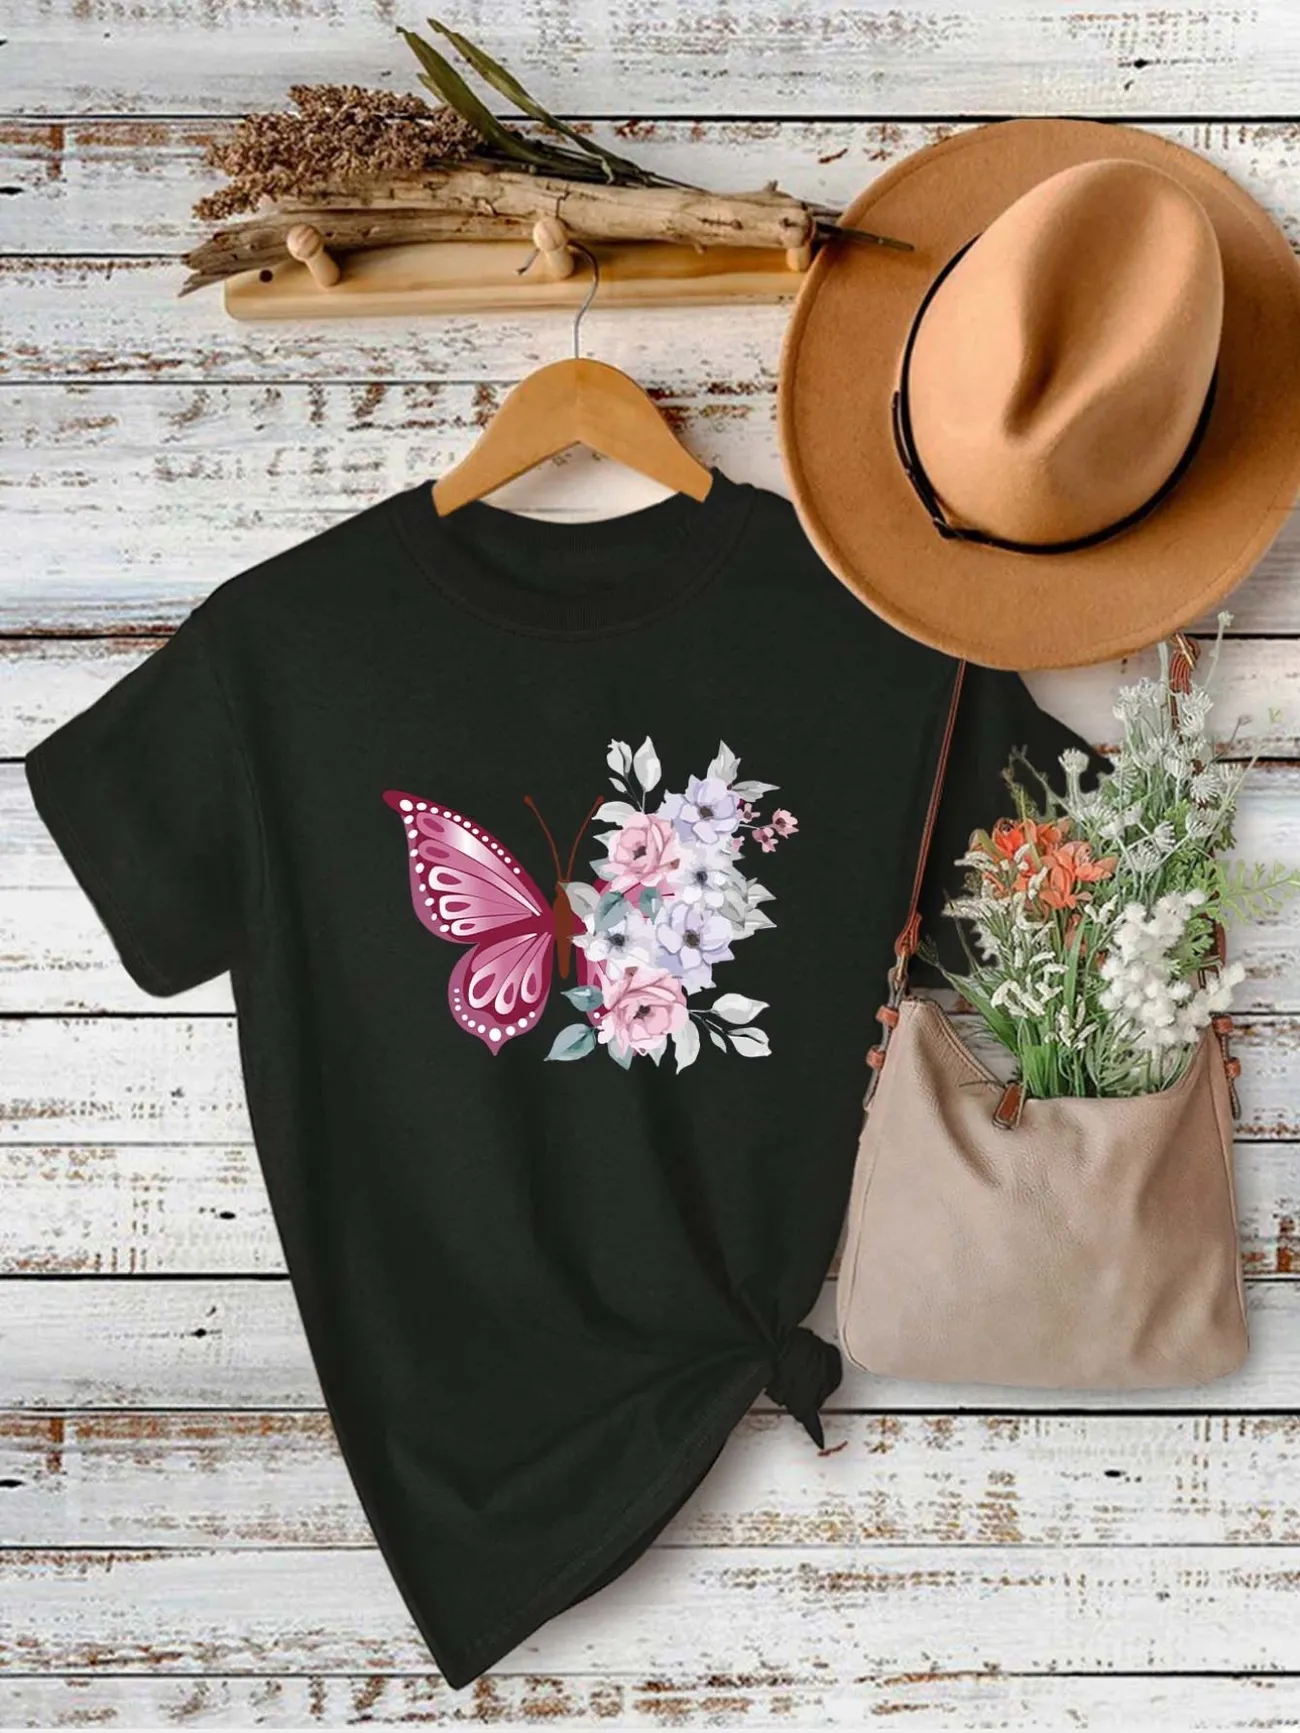 Butterflies And Flowers Print Crew Neck T-shirt, Loose Casual